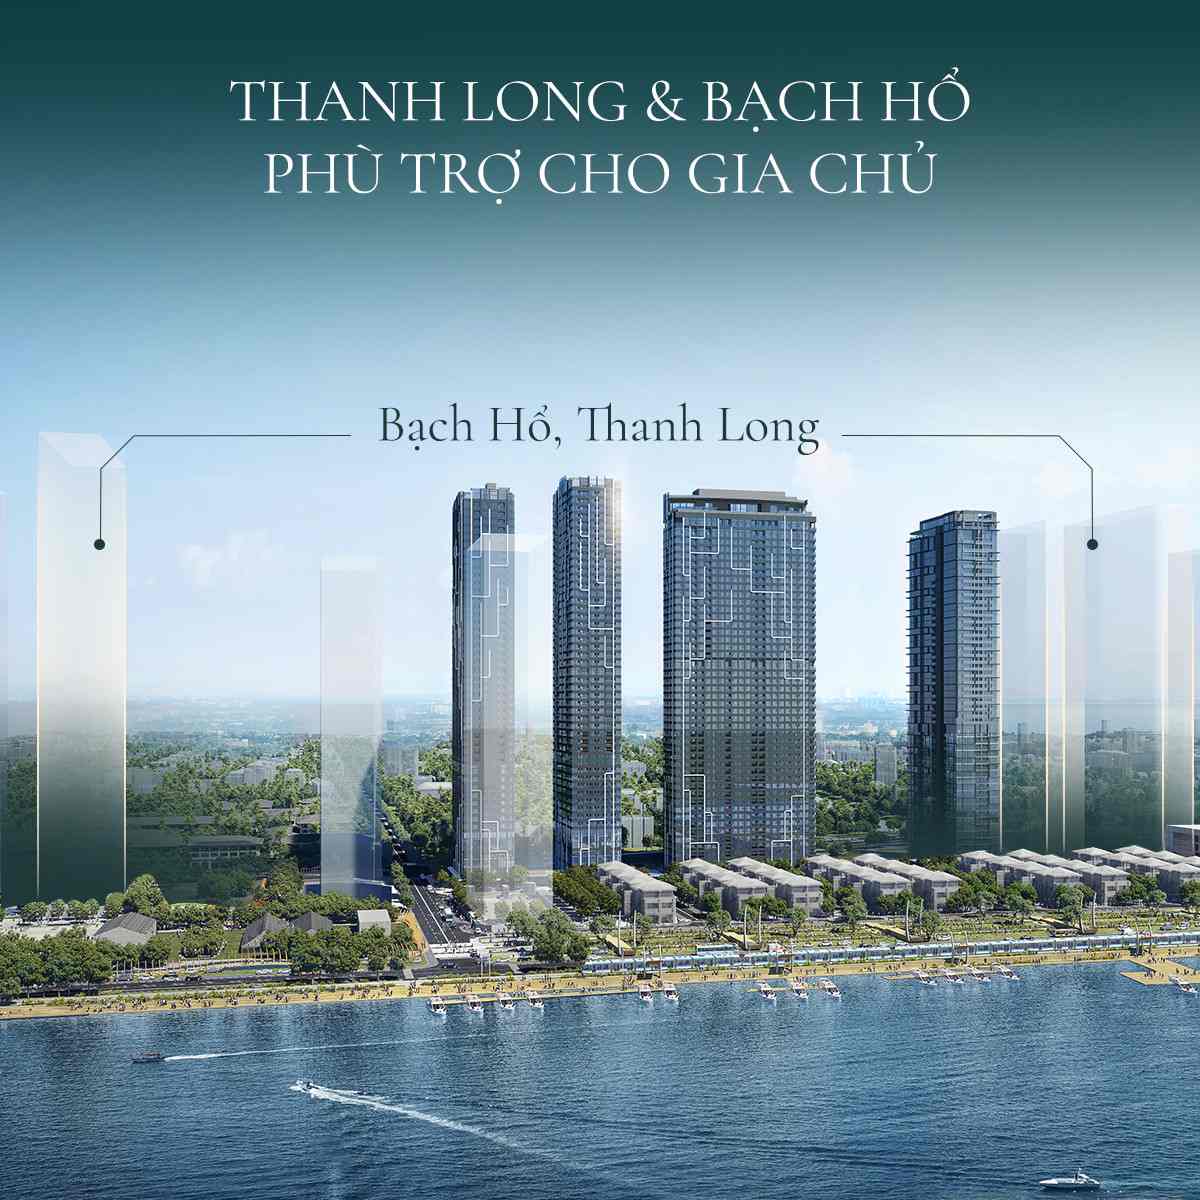 EXPERT MICHAEL CHIANG GENERAL COMMENTARY GRAND MARINA, SAIGON OWNERS 3 feng shui advantages